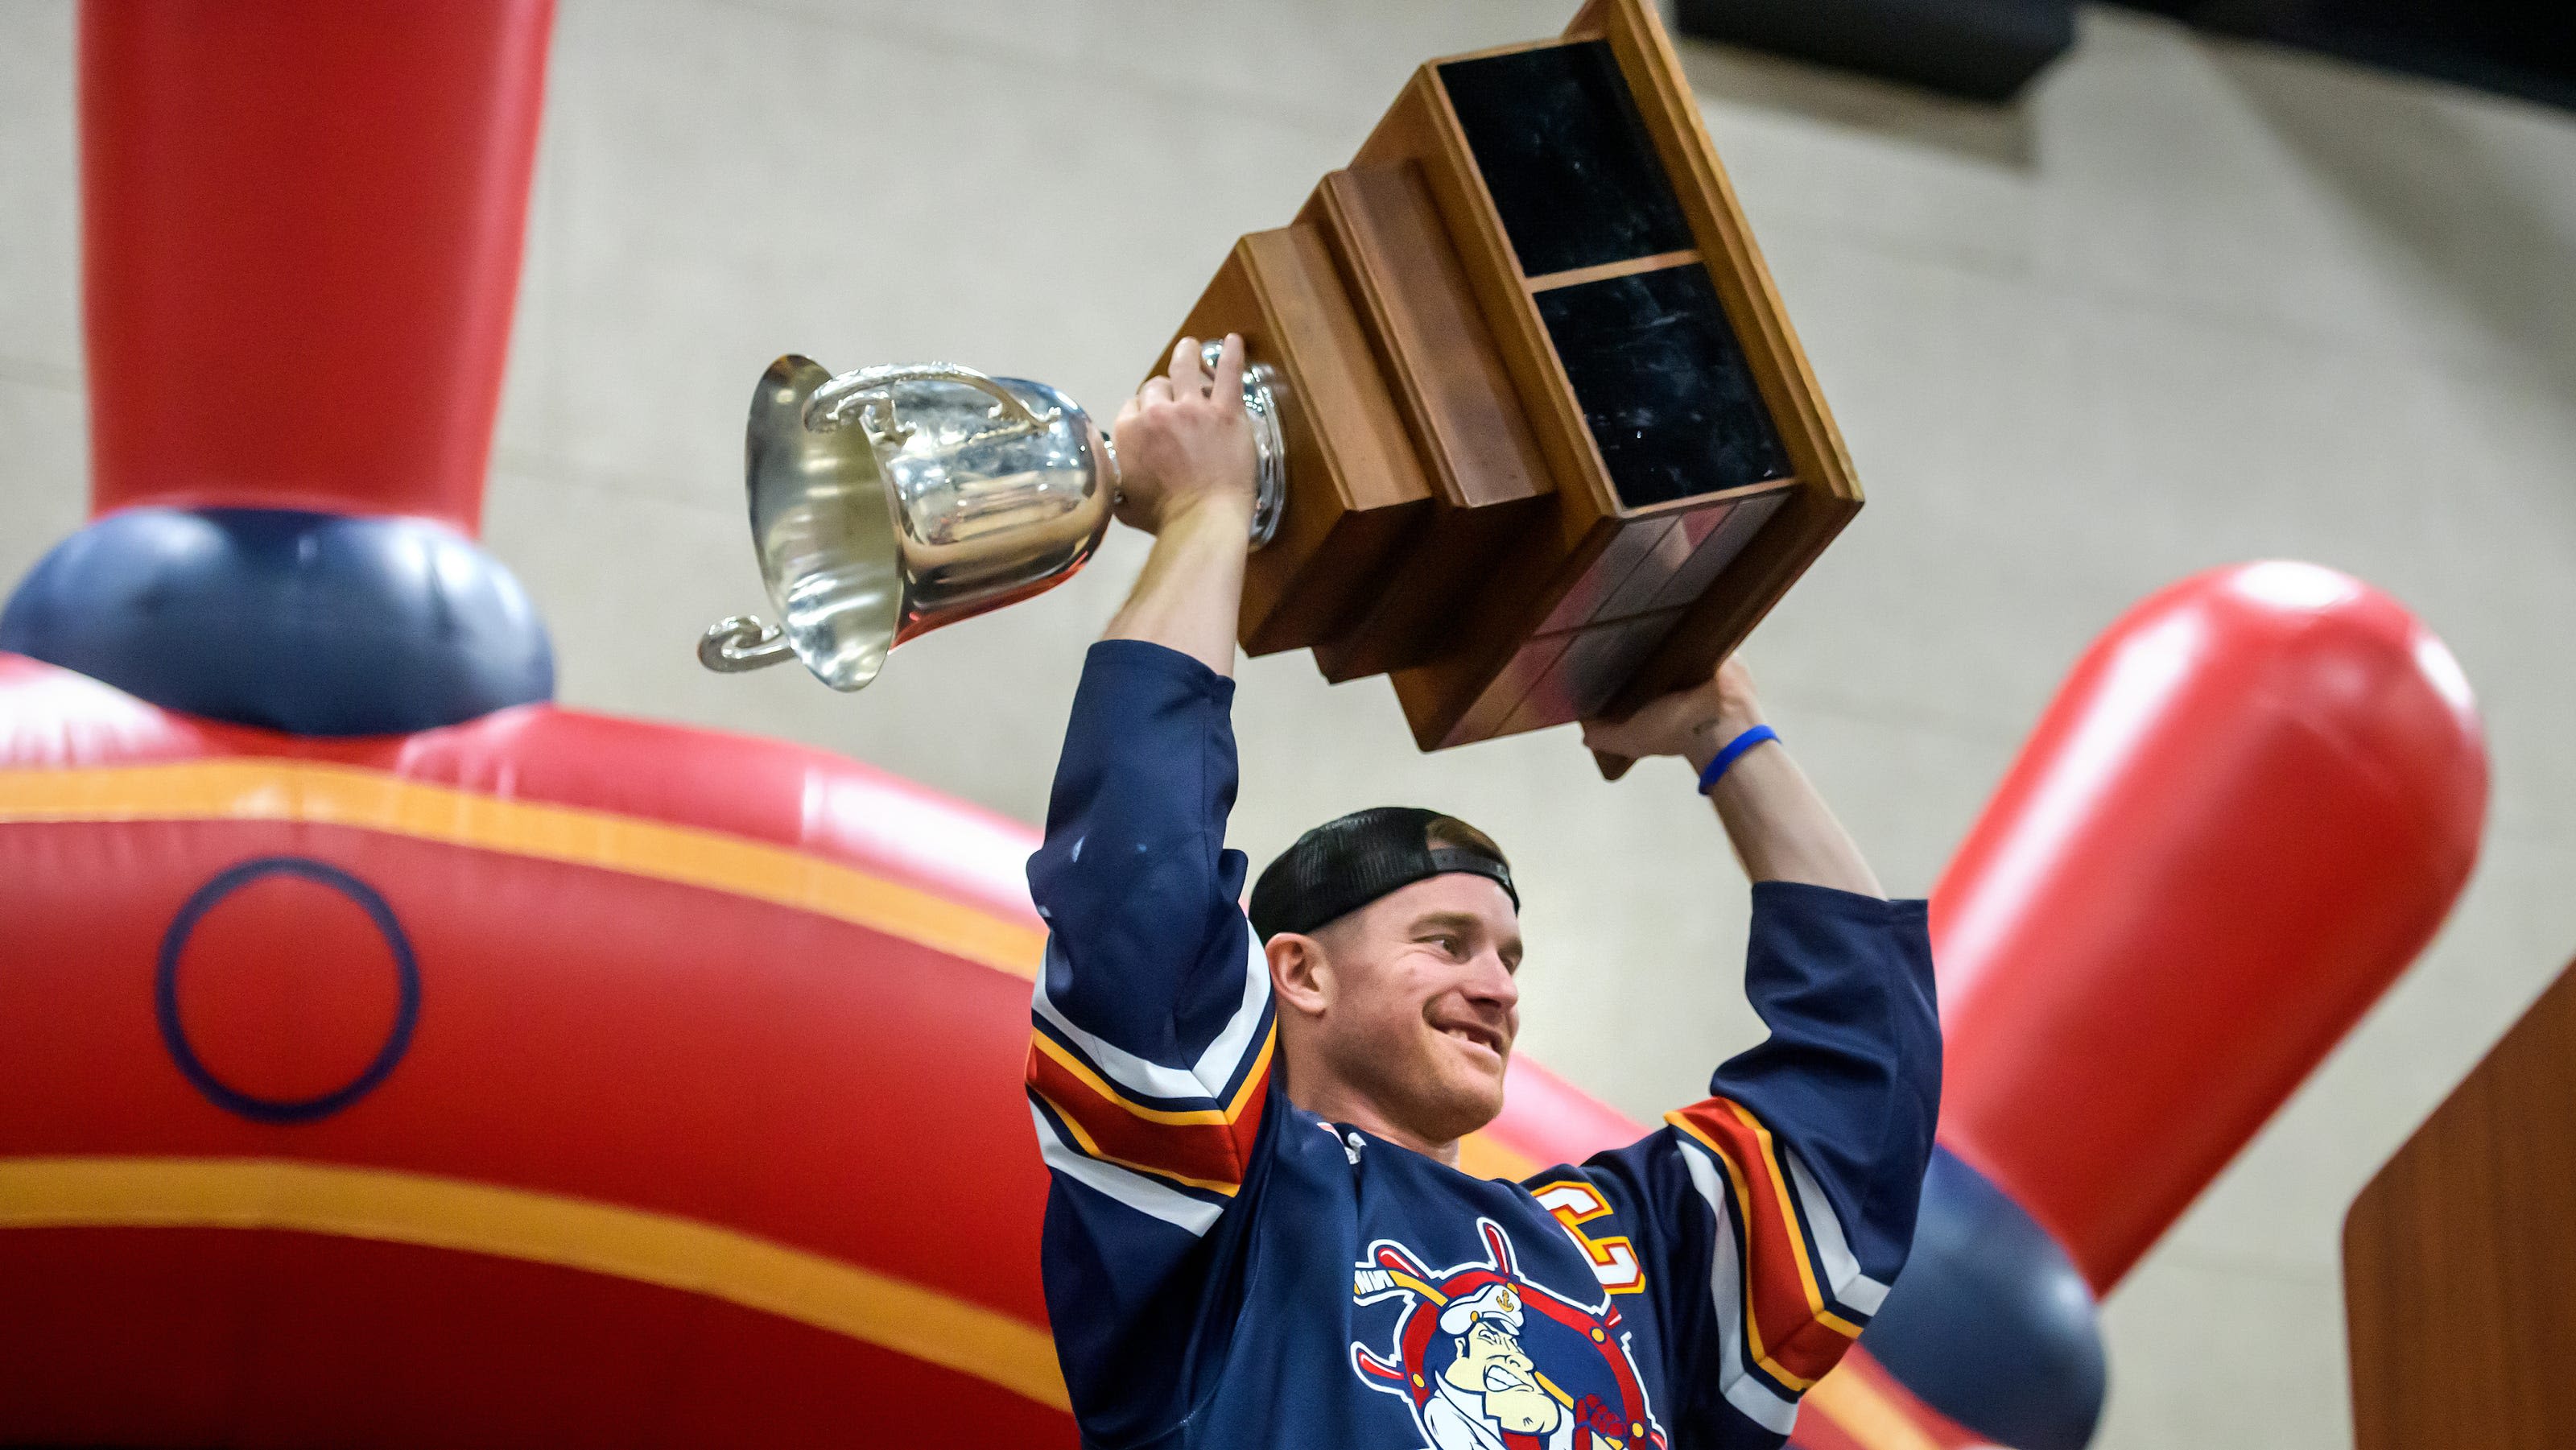 'Dynasty': How the Peoria Rivermen celebrated their President's Cup championship with parade, gathering